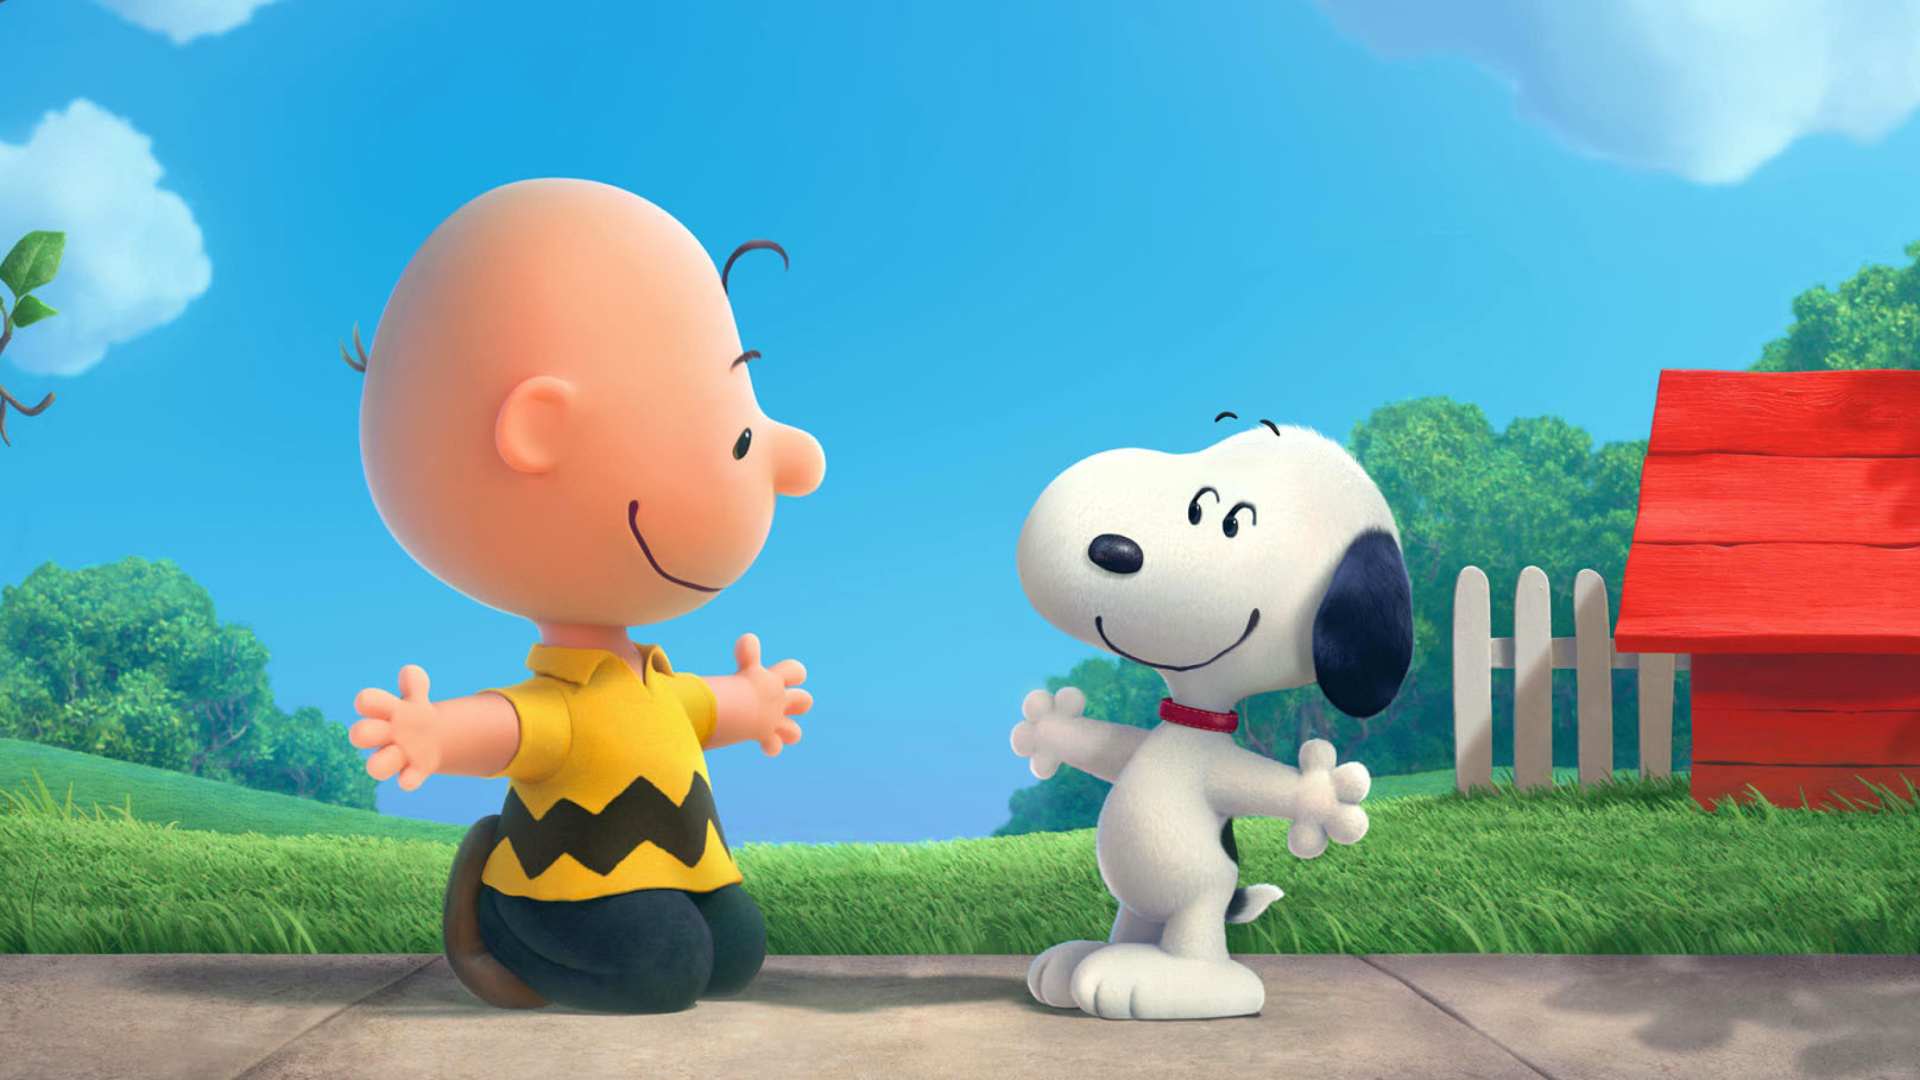 Das The Peanuts Movie with Snoopy and Charlie Brown Wallpaper 1920x1080